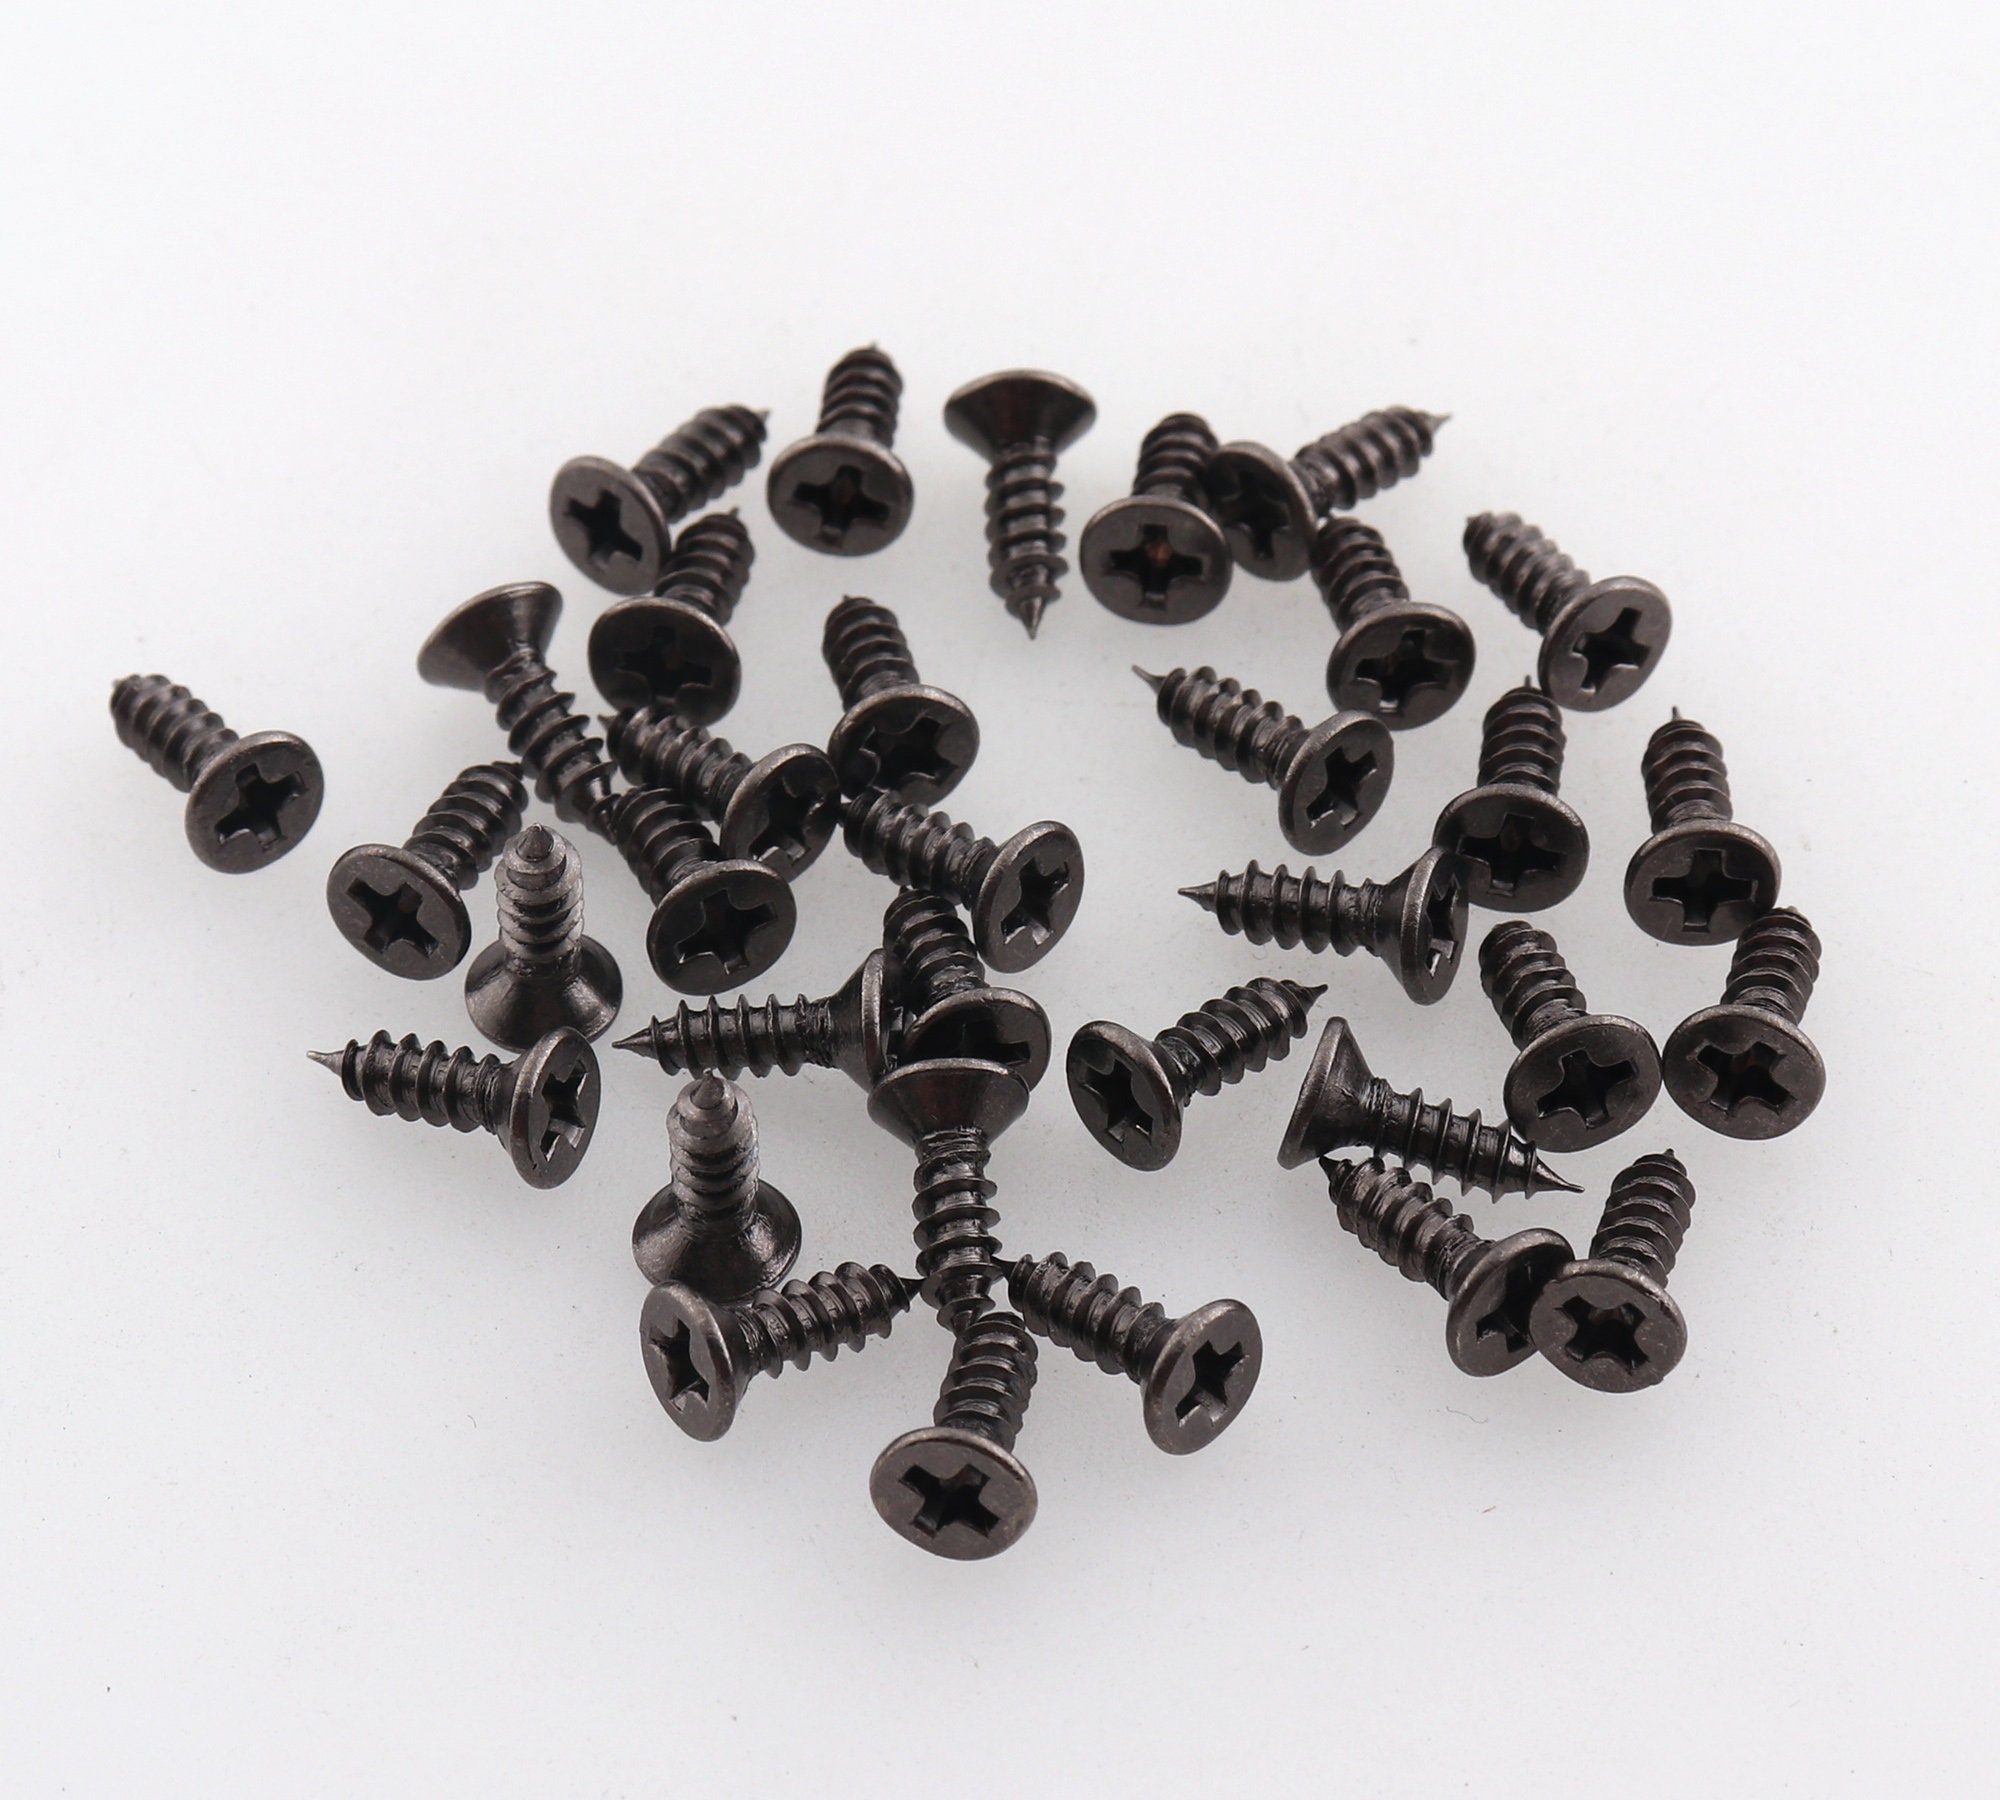 Phillips Flat Head Wood Screw,red Copper Screws for Hinges and